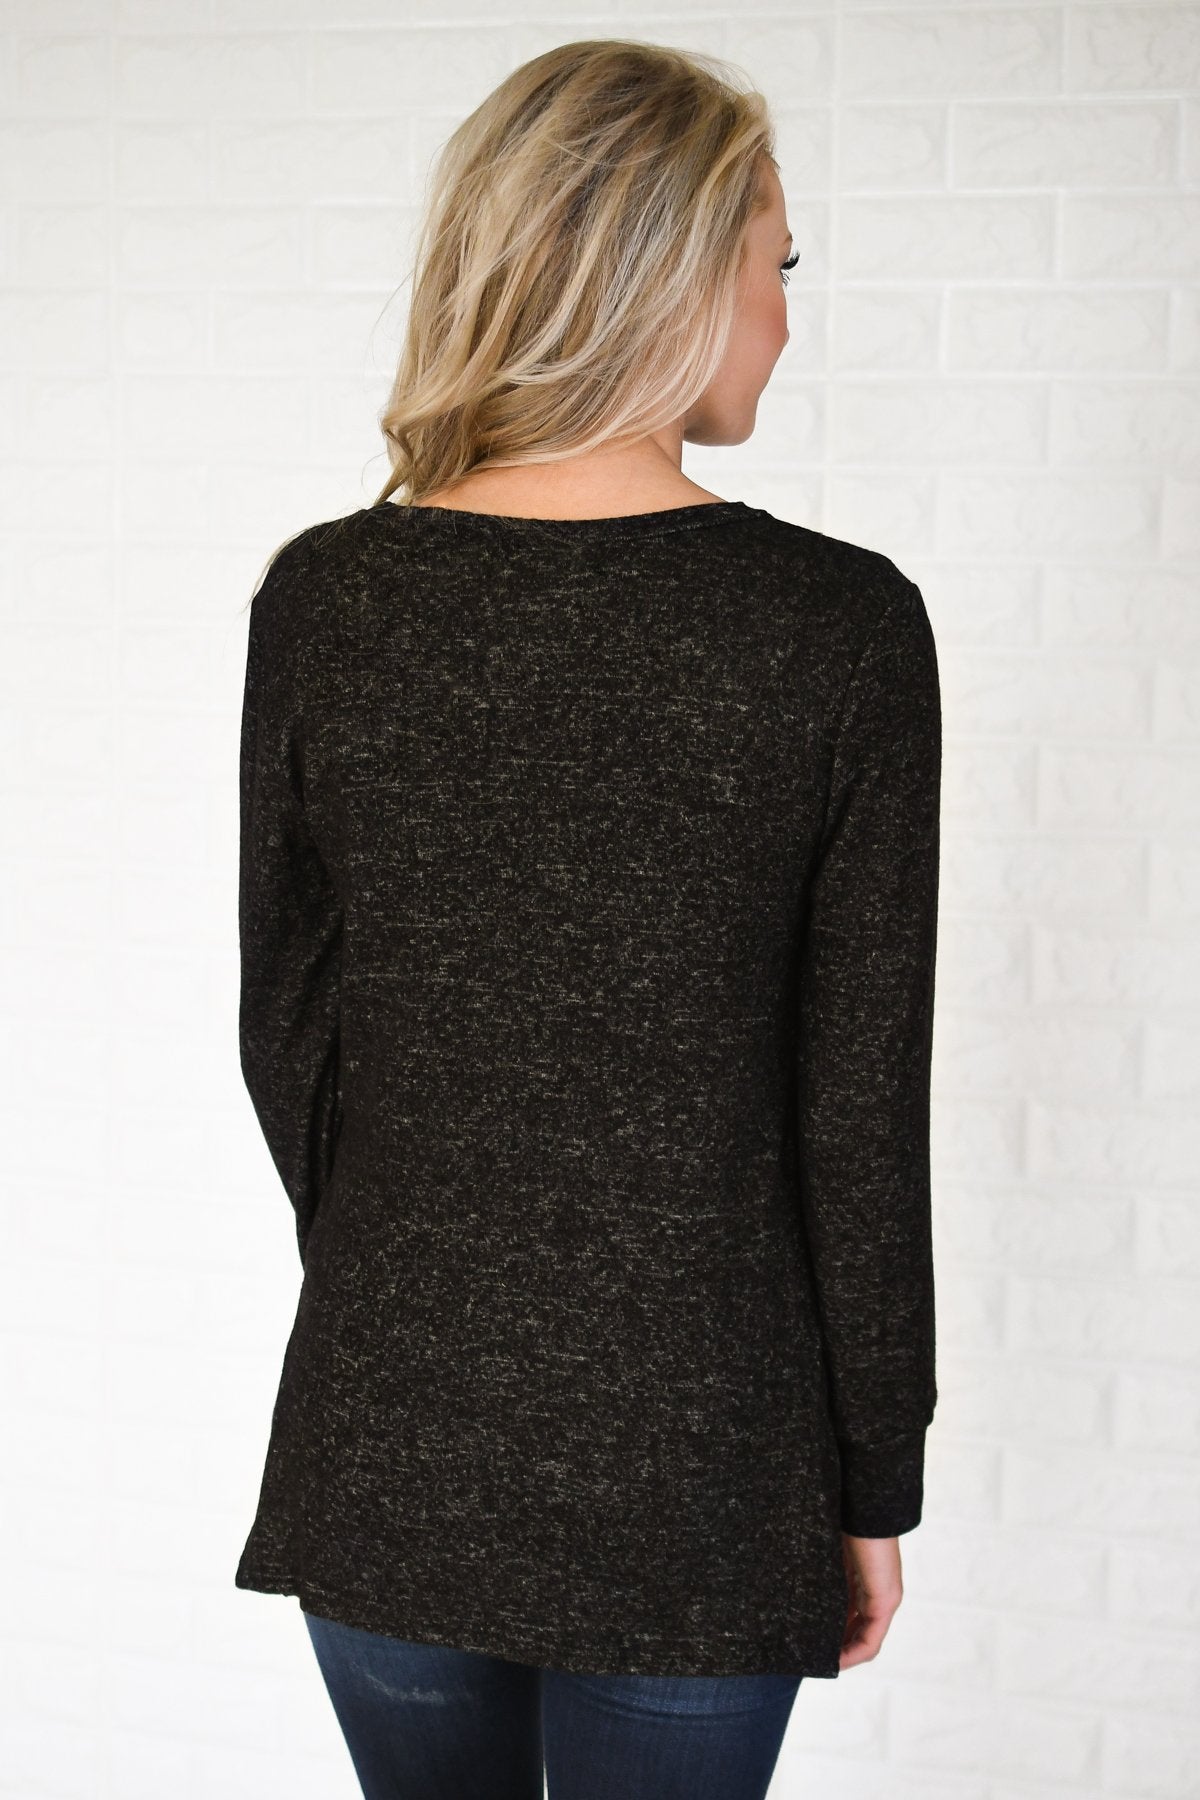 Cozy Up Top - Speckled Black